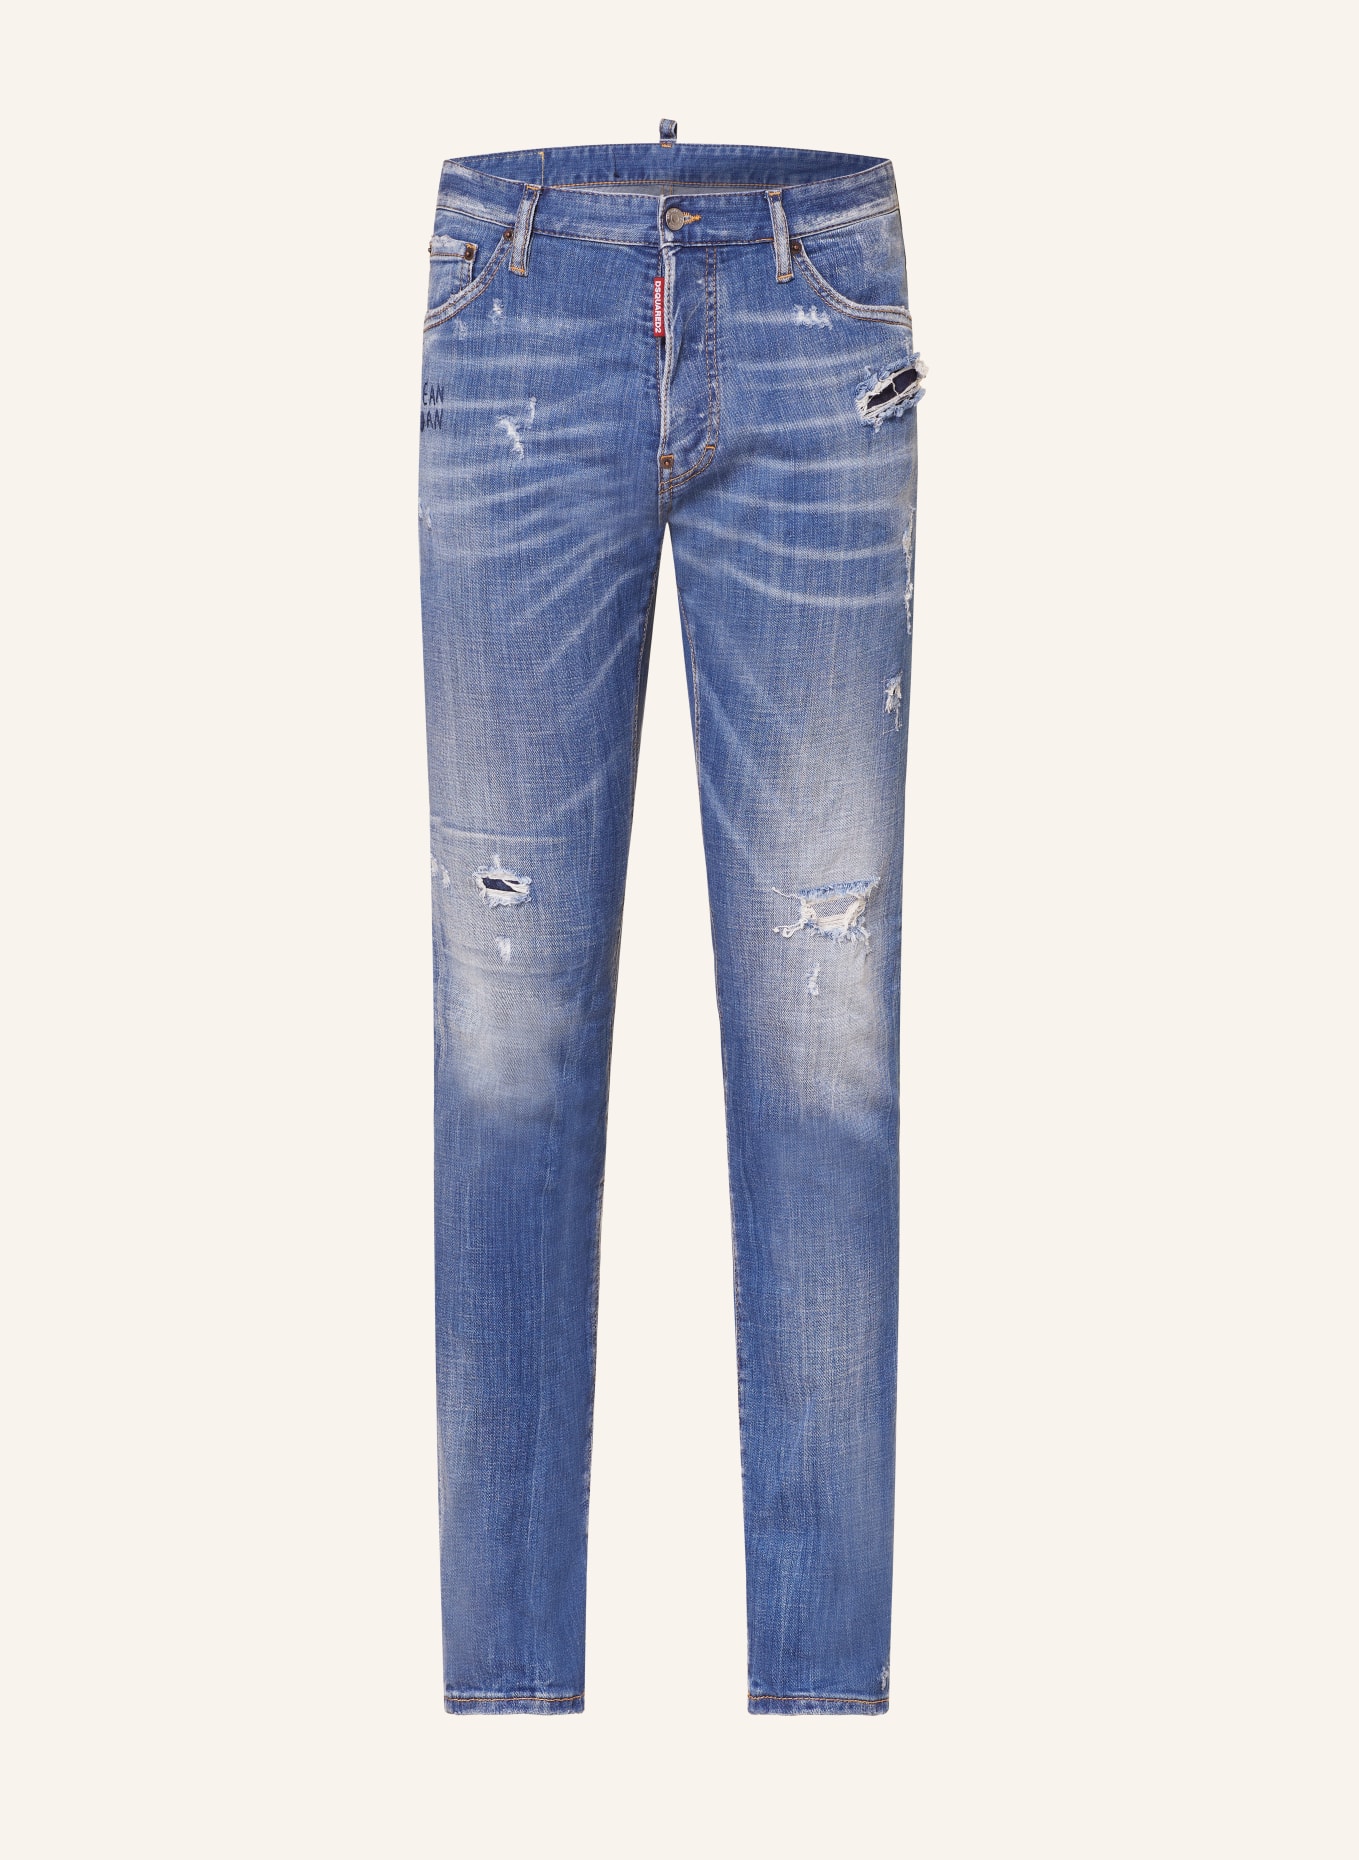 DSQUARED2 Destroyed Jeans COOL GUY Extra Slim Fit, Farbe: 470 BLUE NAVY (Bild 1)